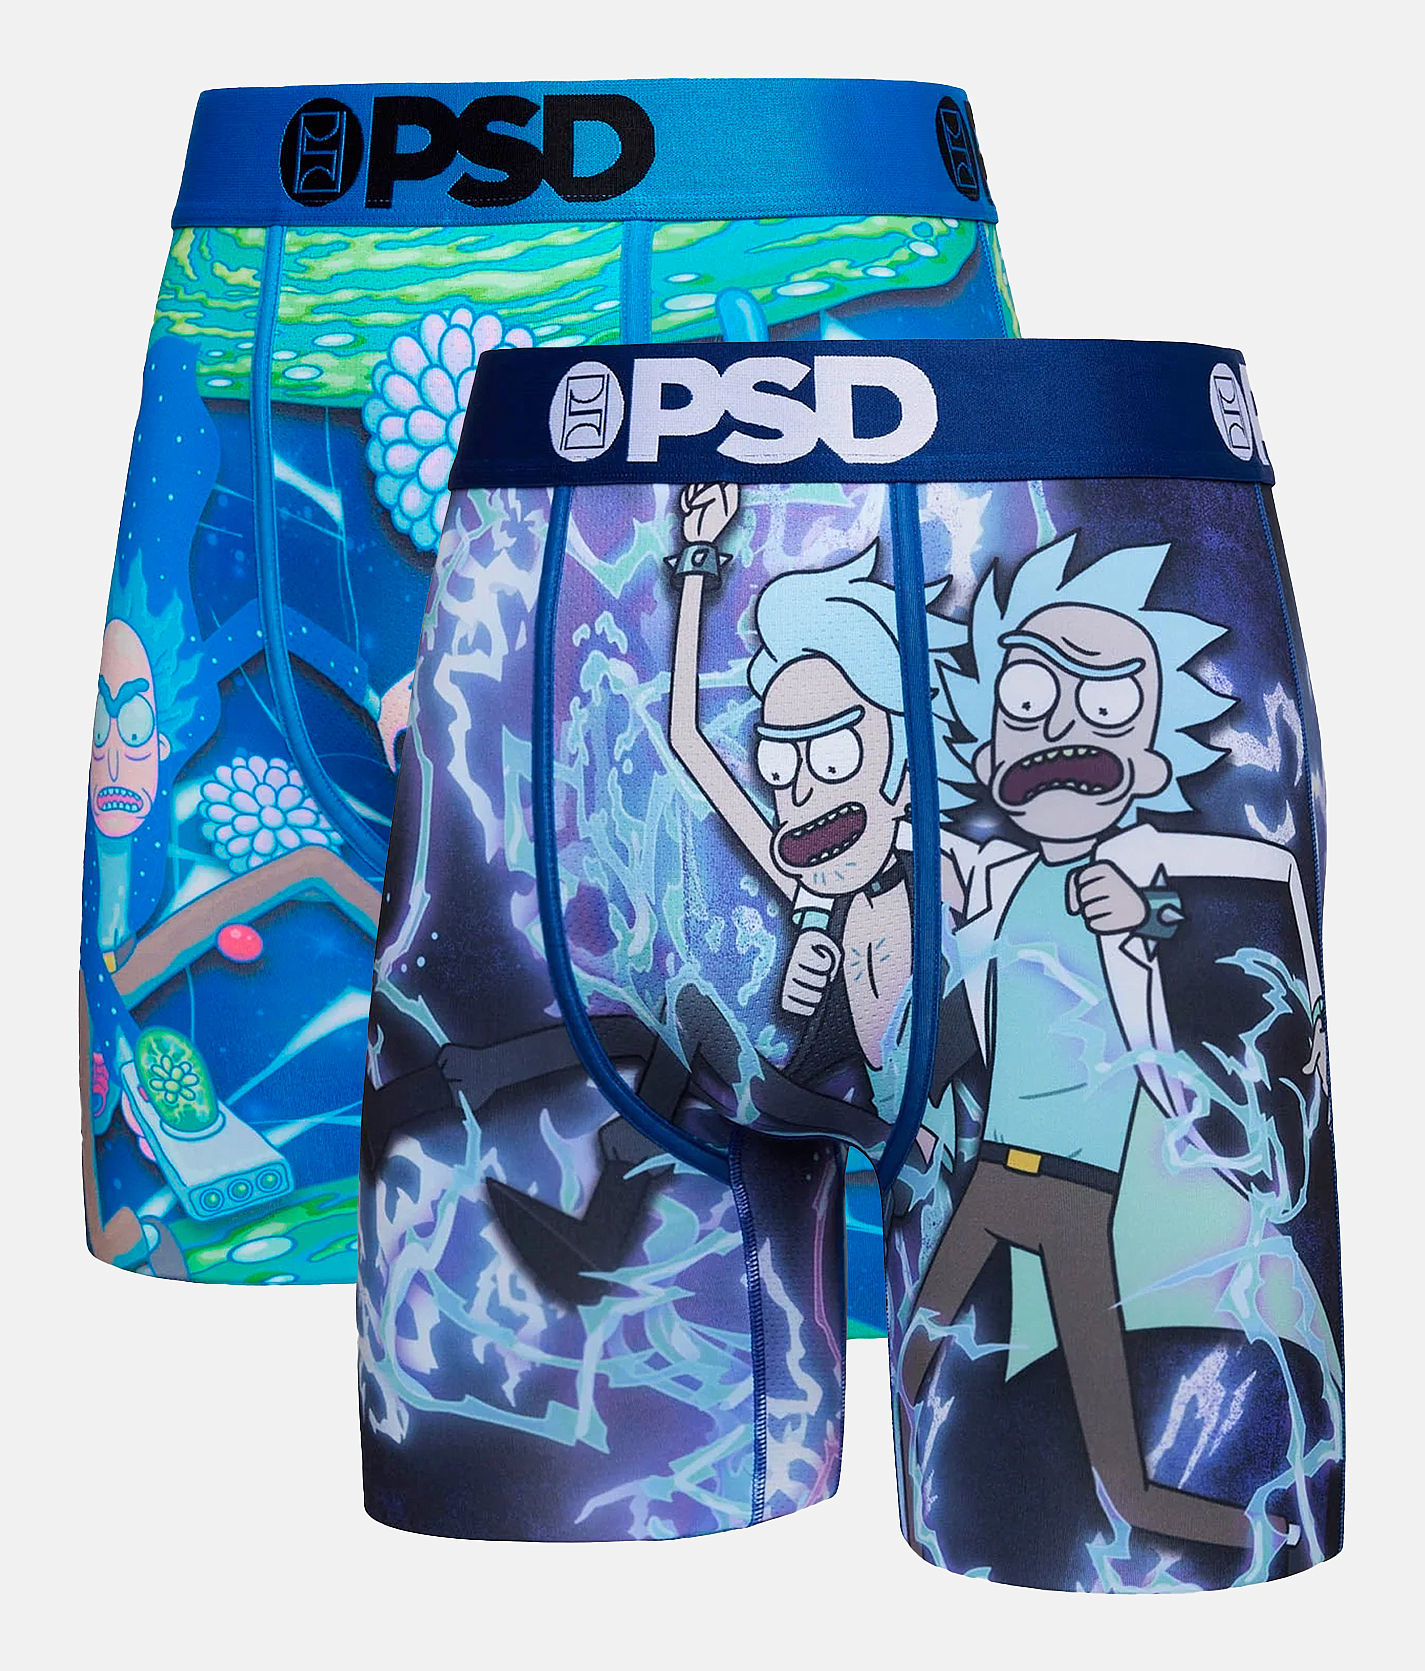 Rick and Morty Pickle Rick All Over Print Boxer Briefs-XLarge (40